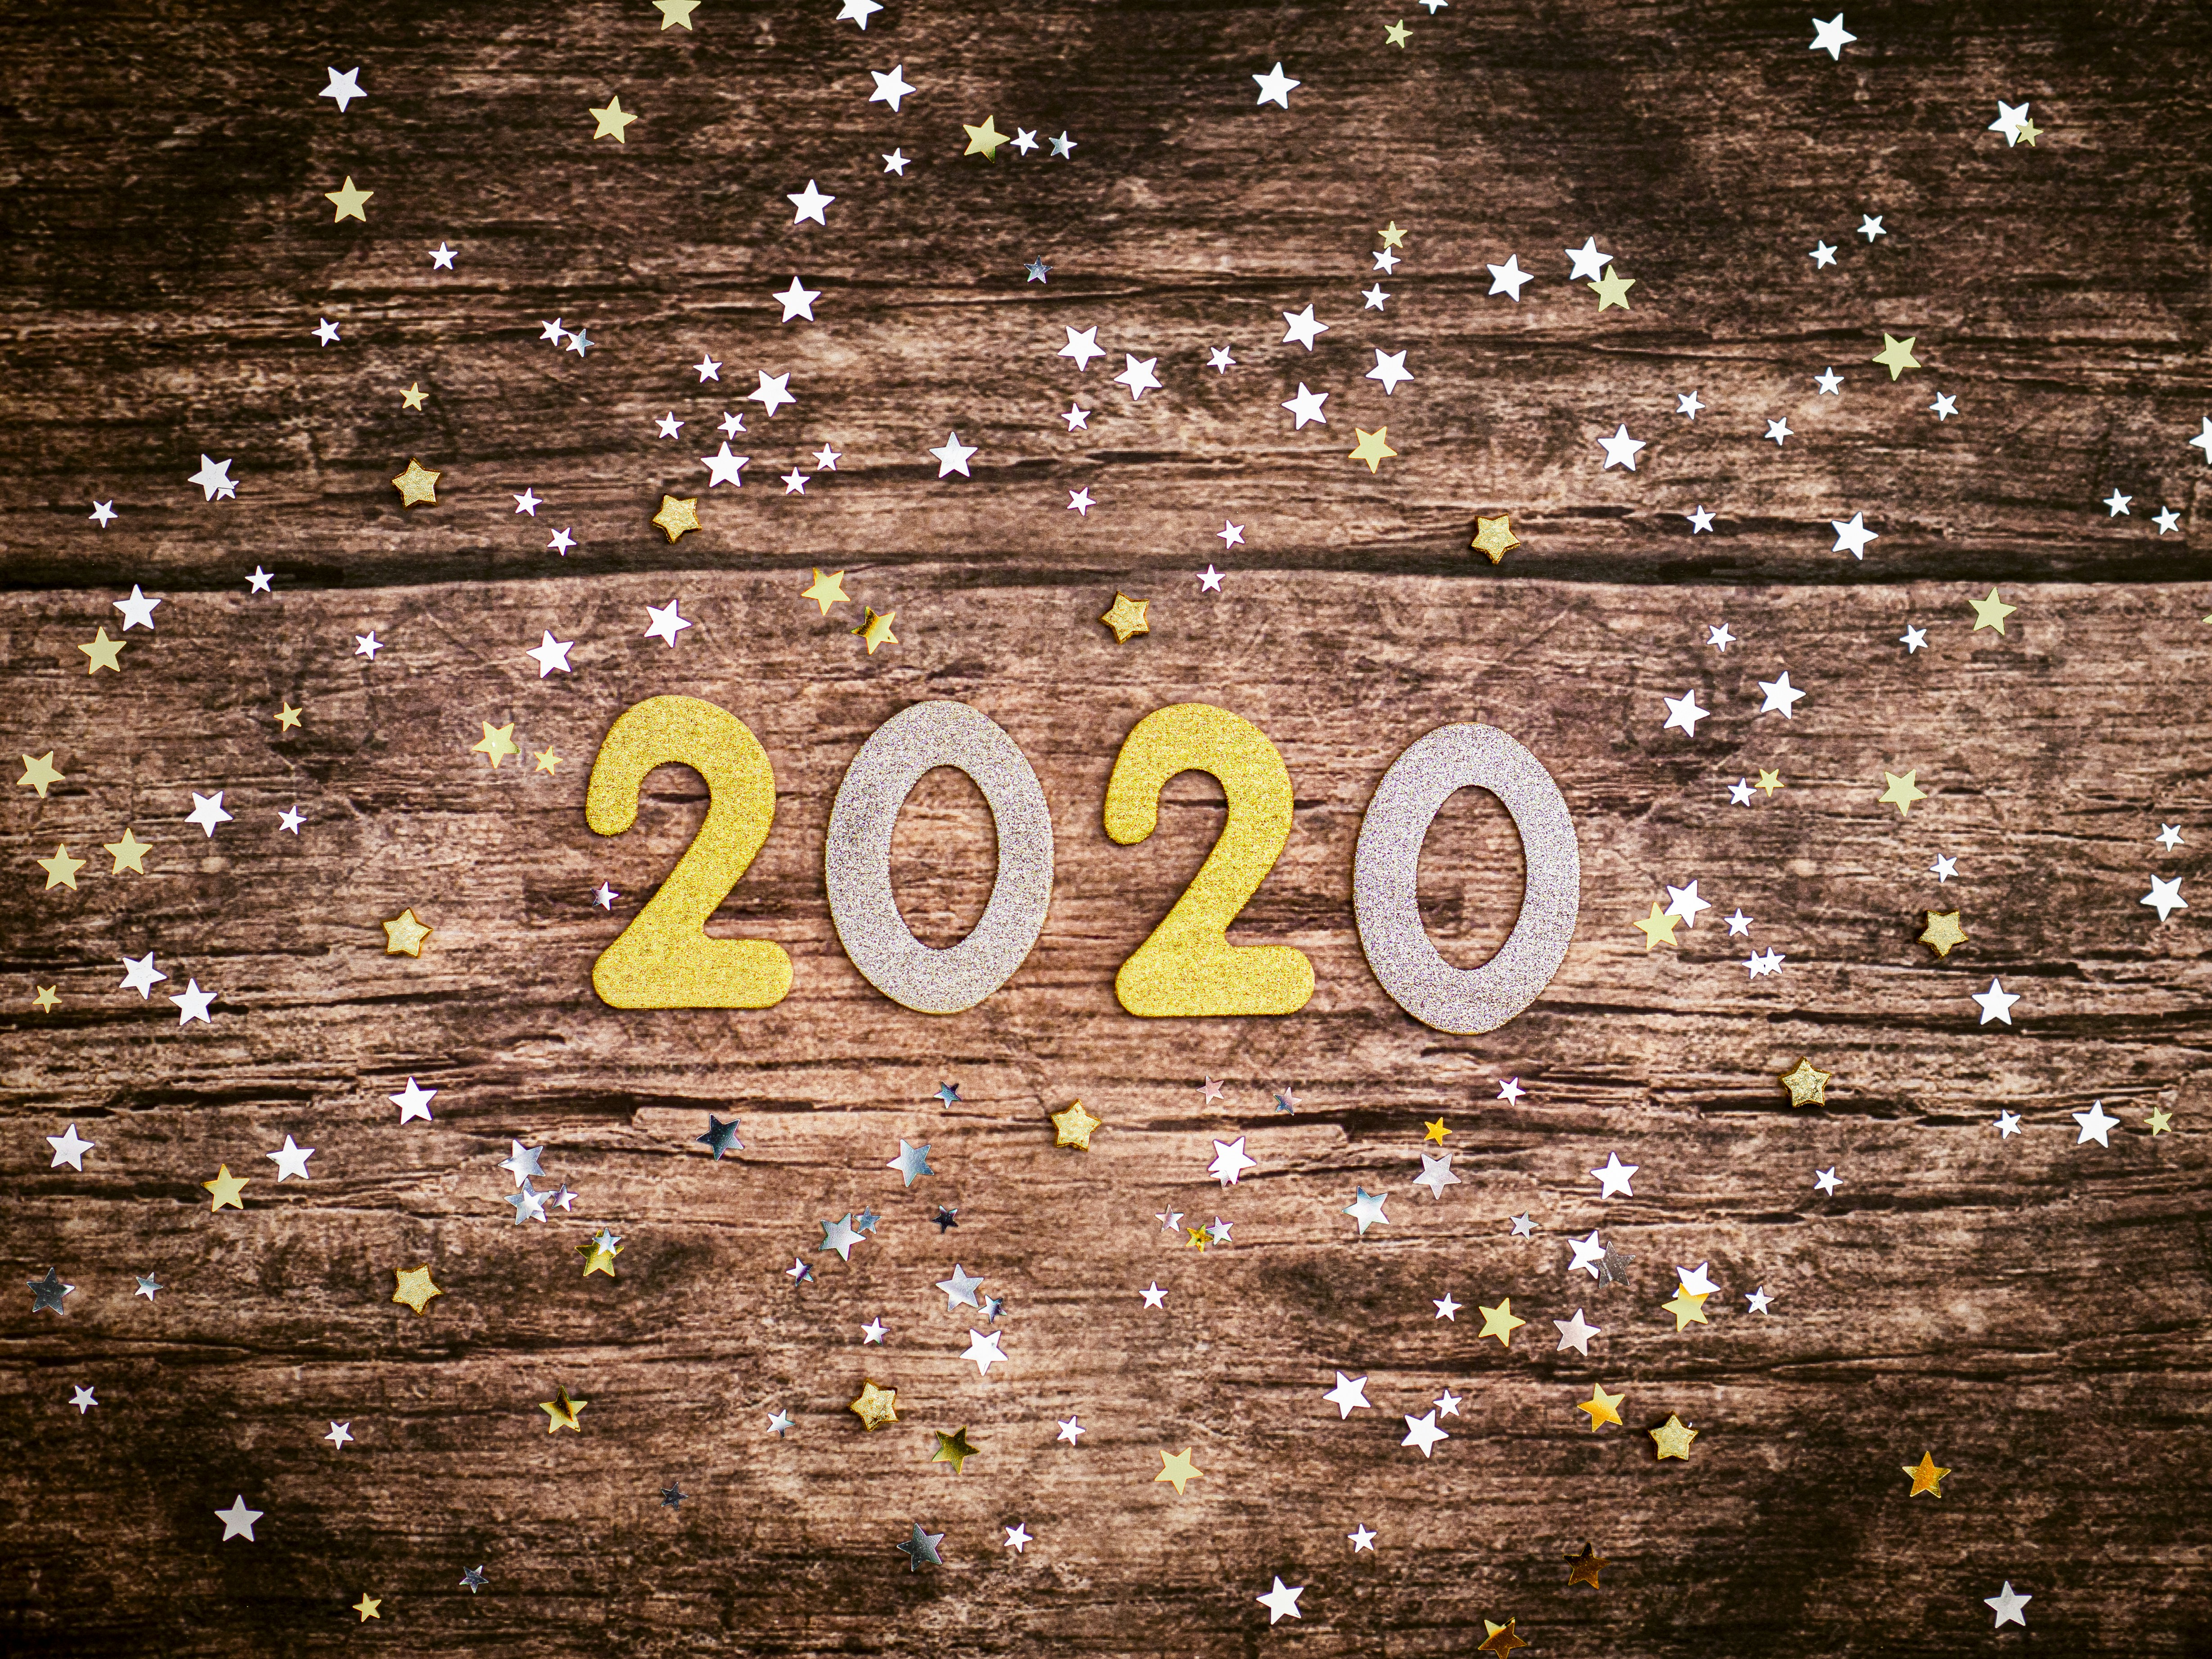 2020 sign